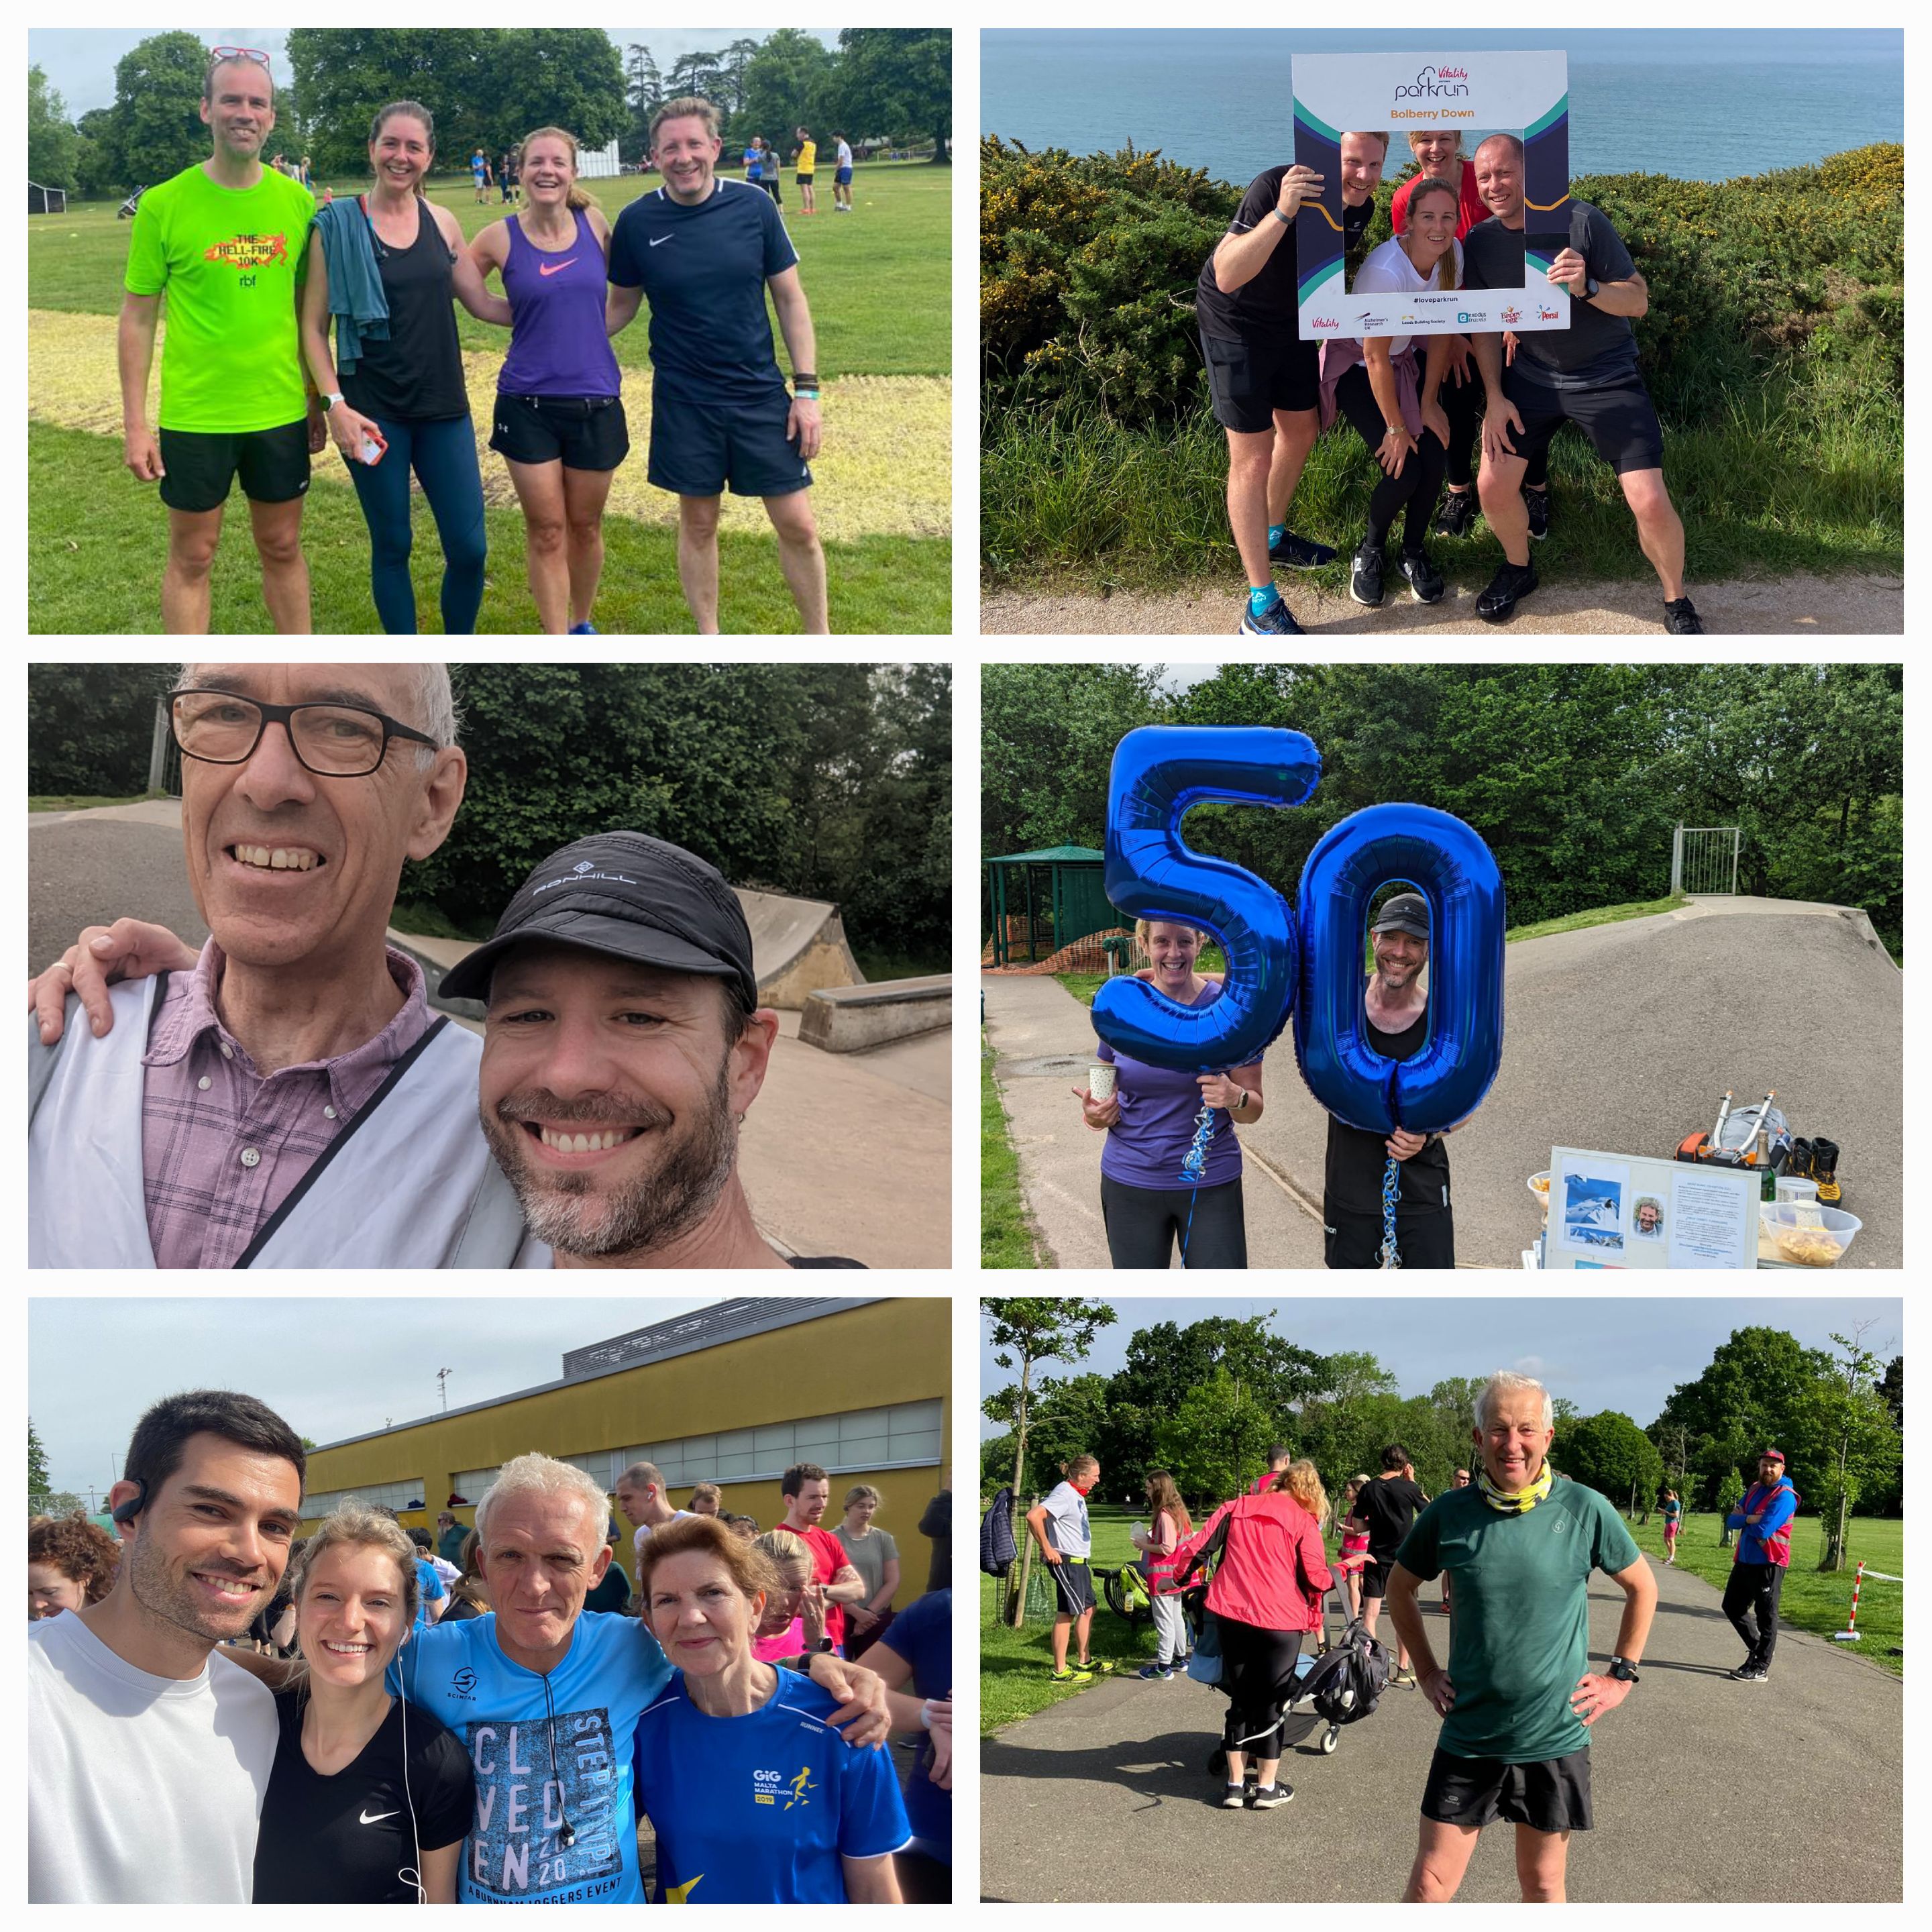 parkrun report – 21st May 2022